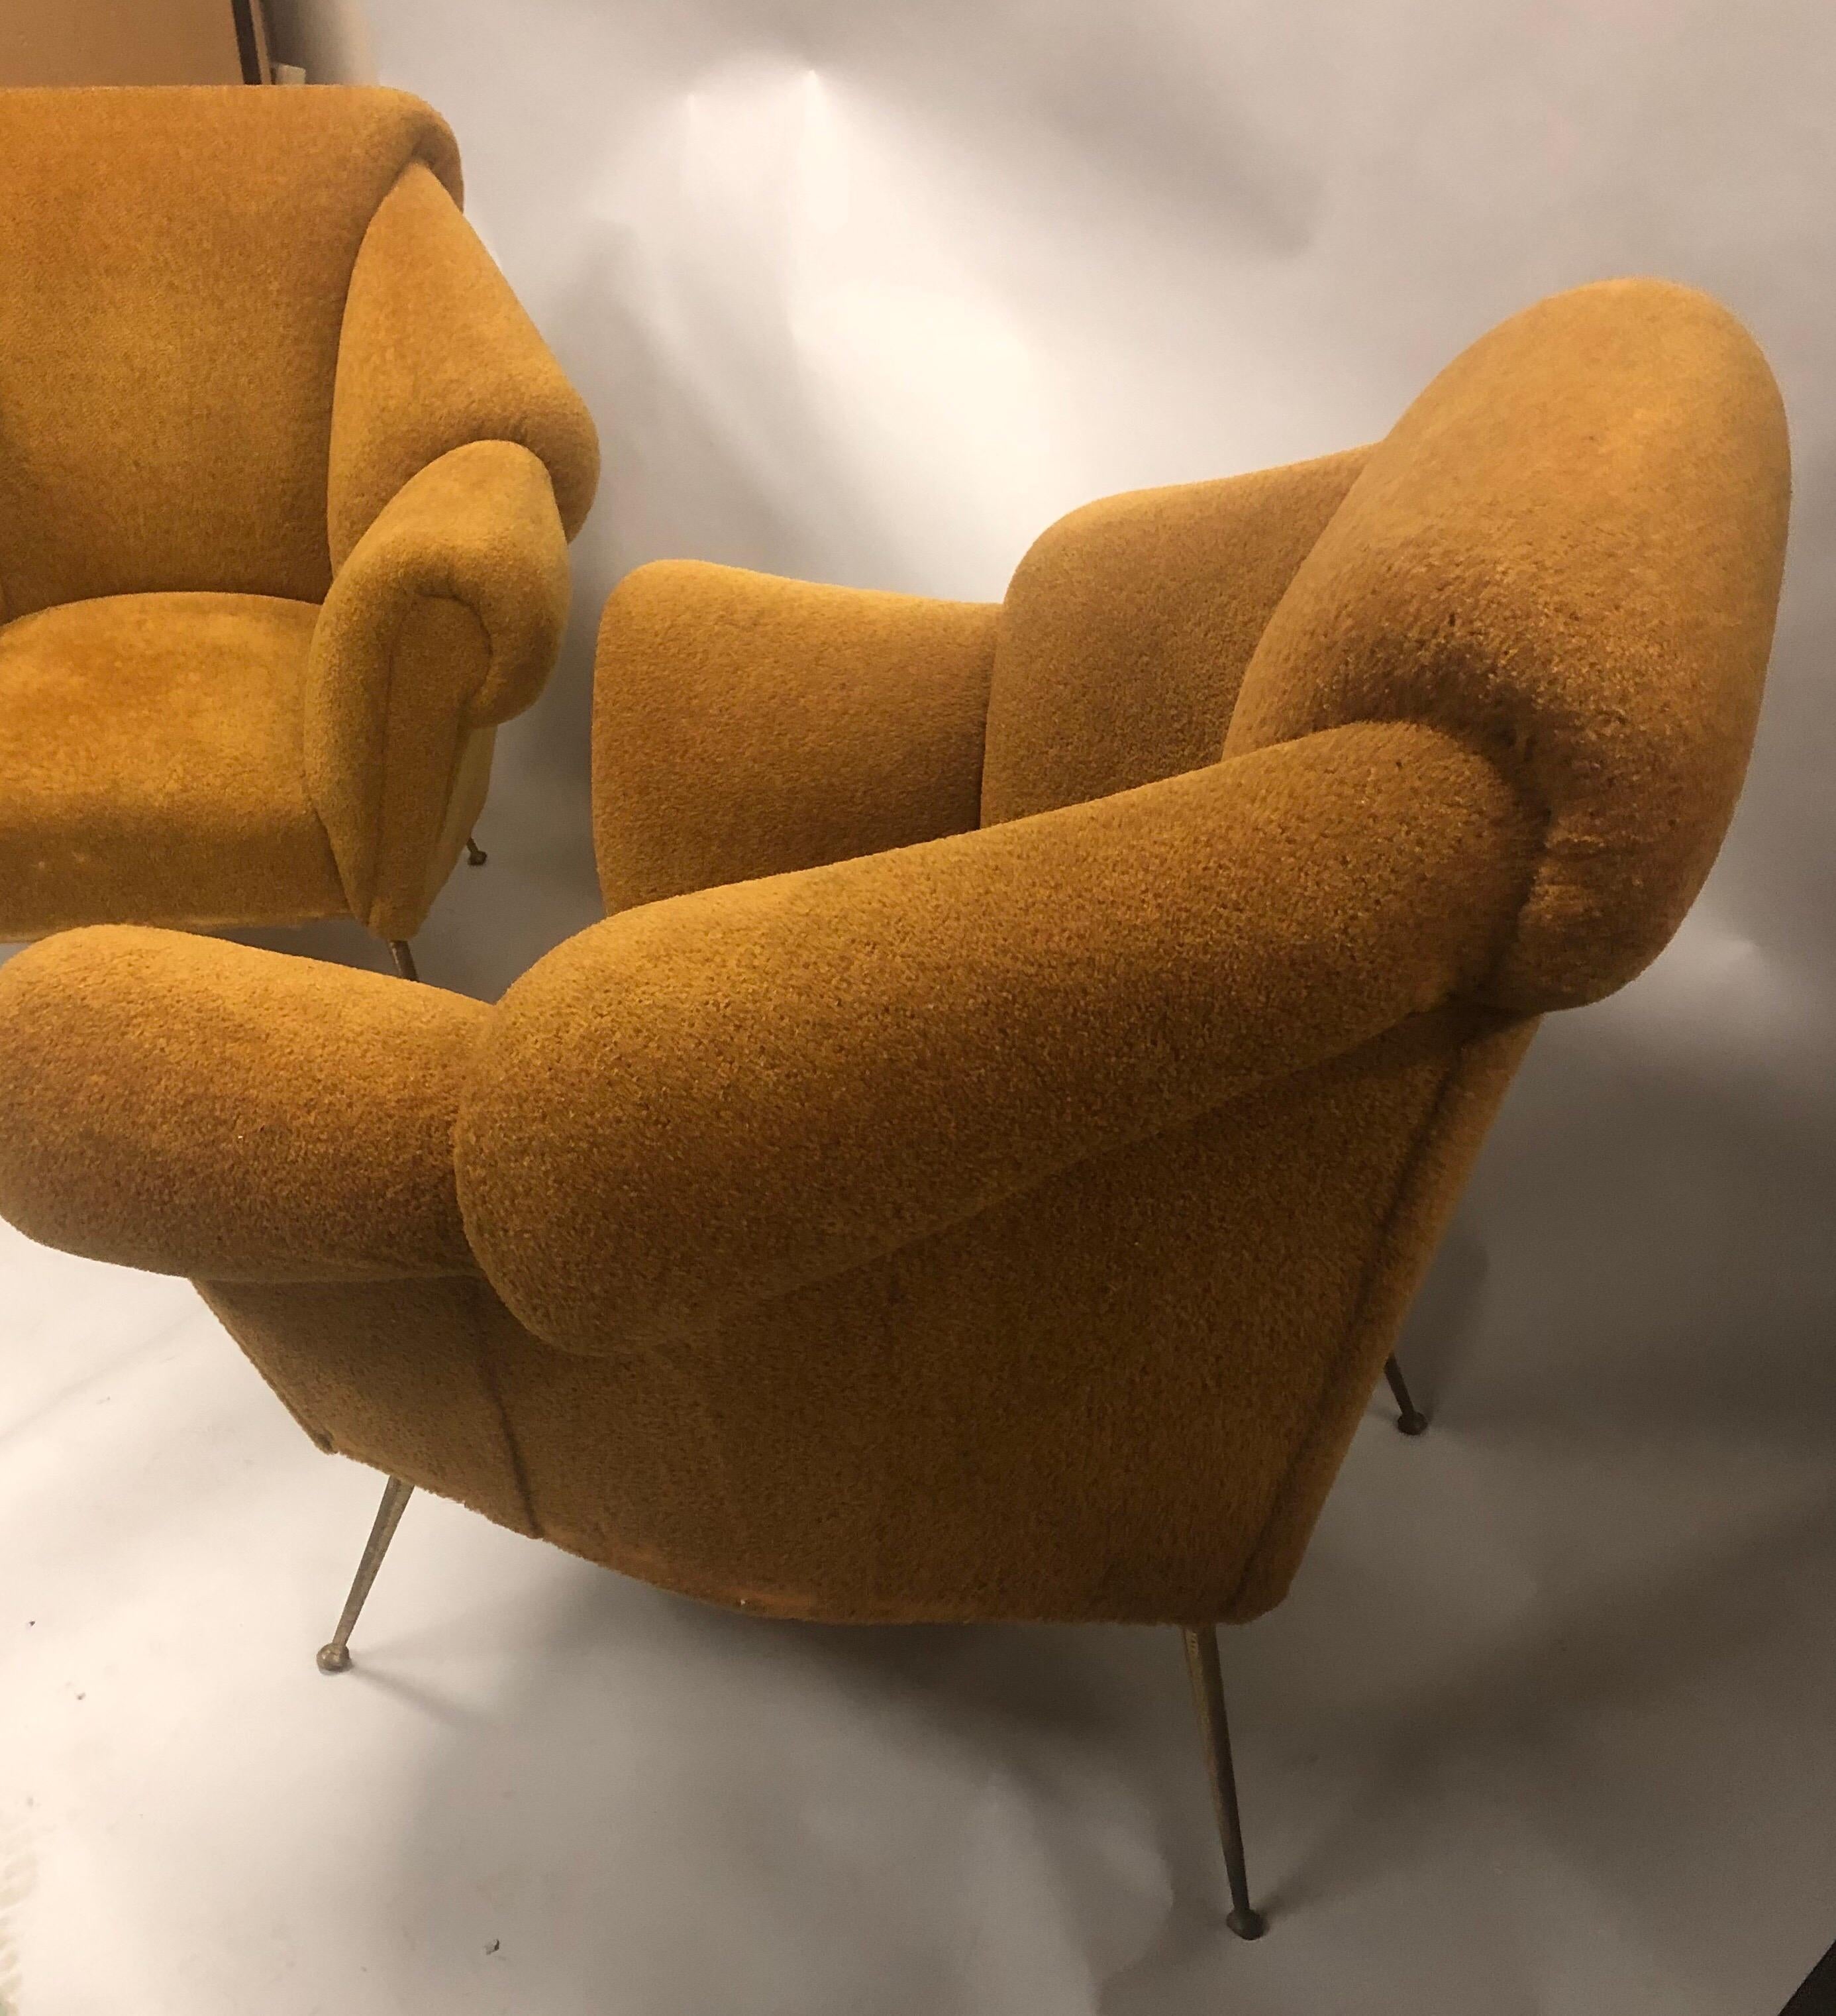 Upholstery Pair of Italian Futurist Lounge Chairs / Armchairs Attributed to Giacomo Balla